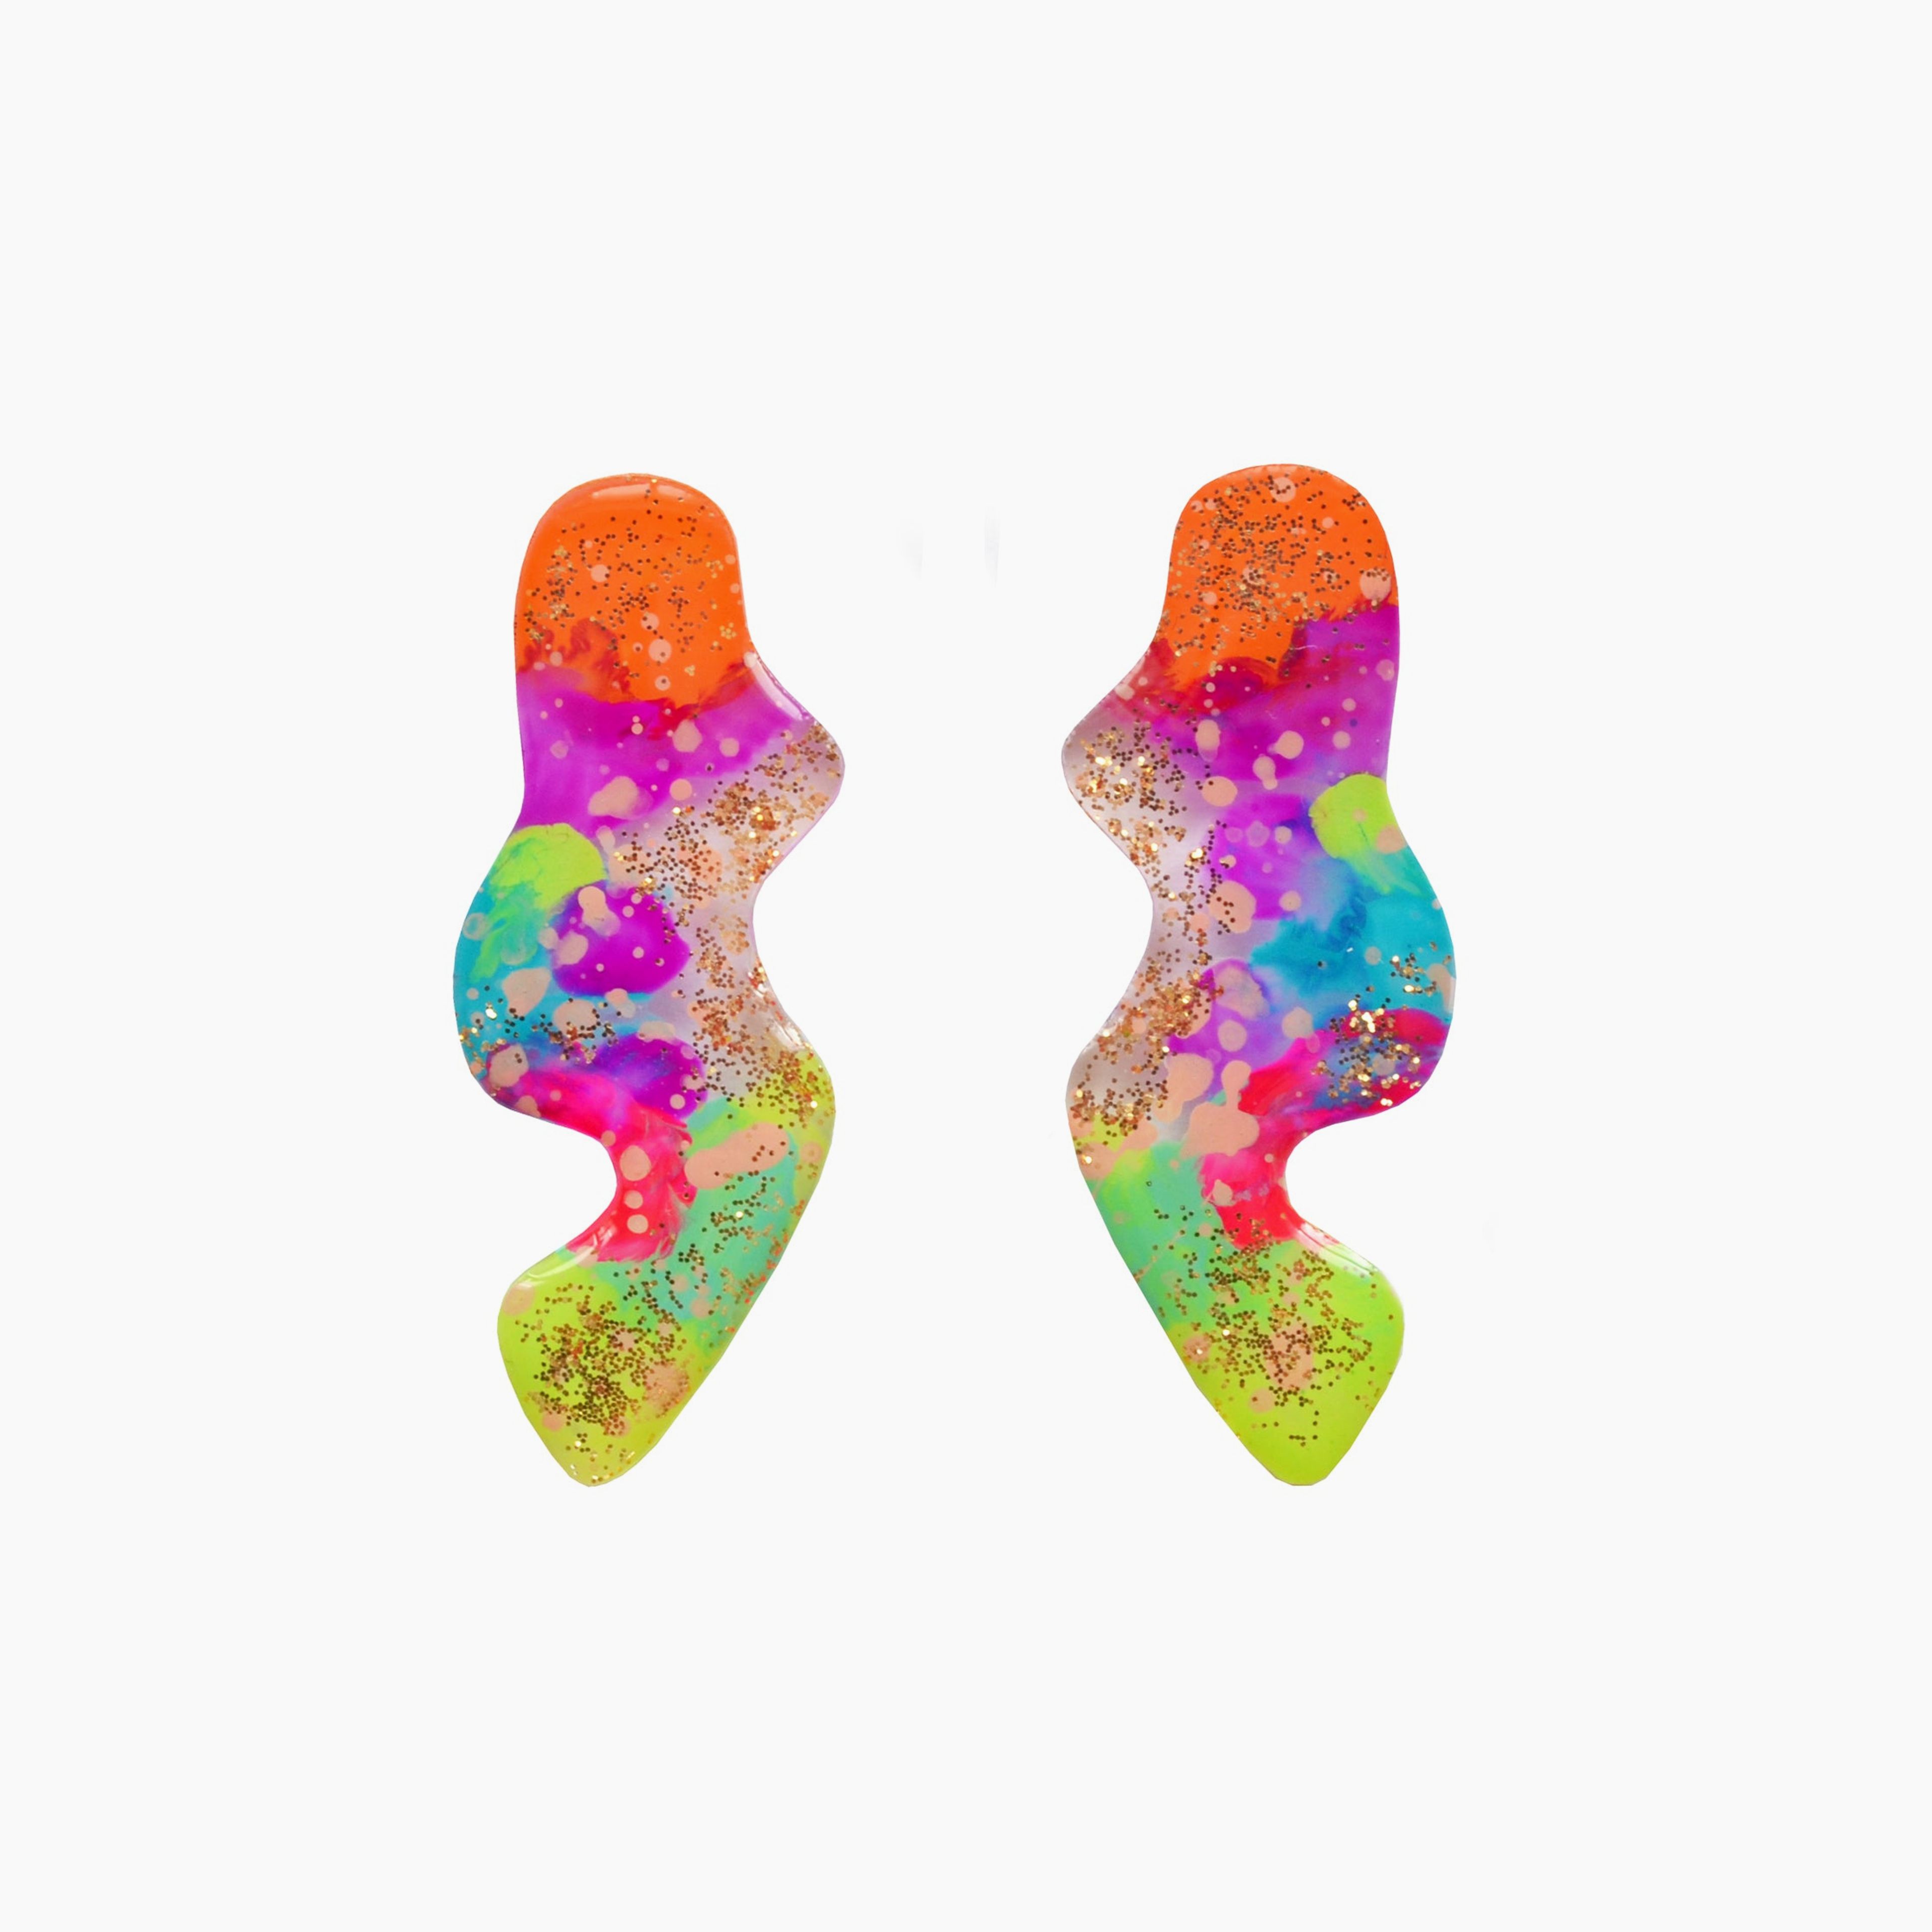 Orange and Green Neon Abstract Wavy Squiggle Resin Stud Earrings